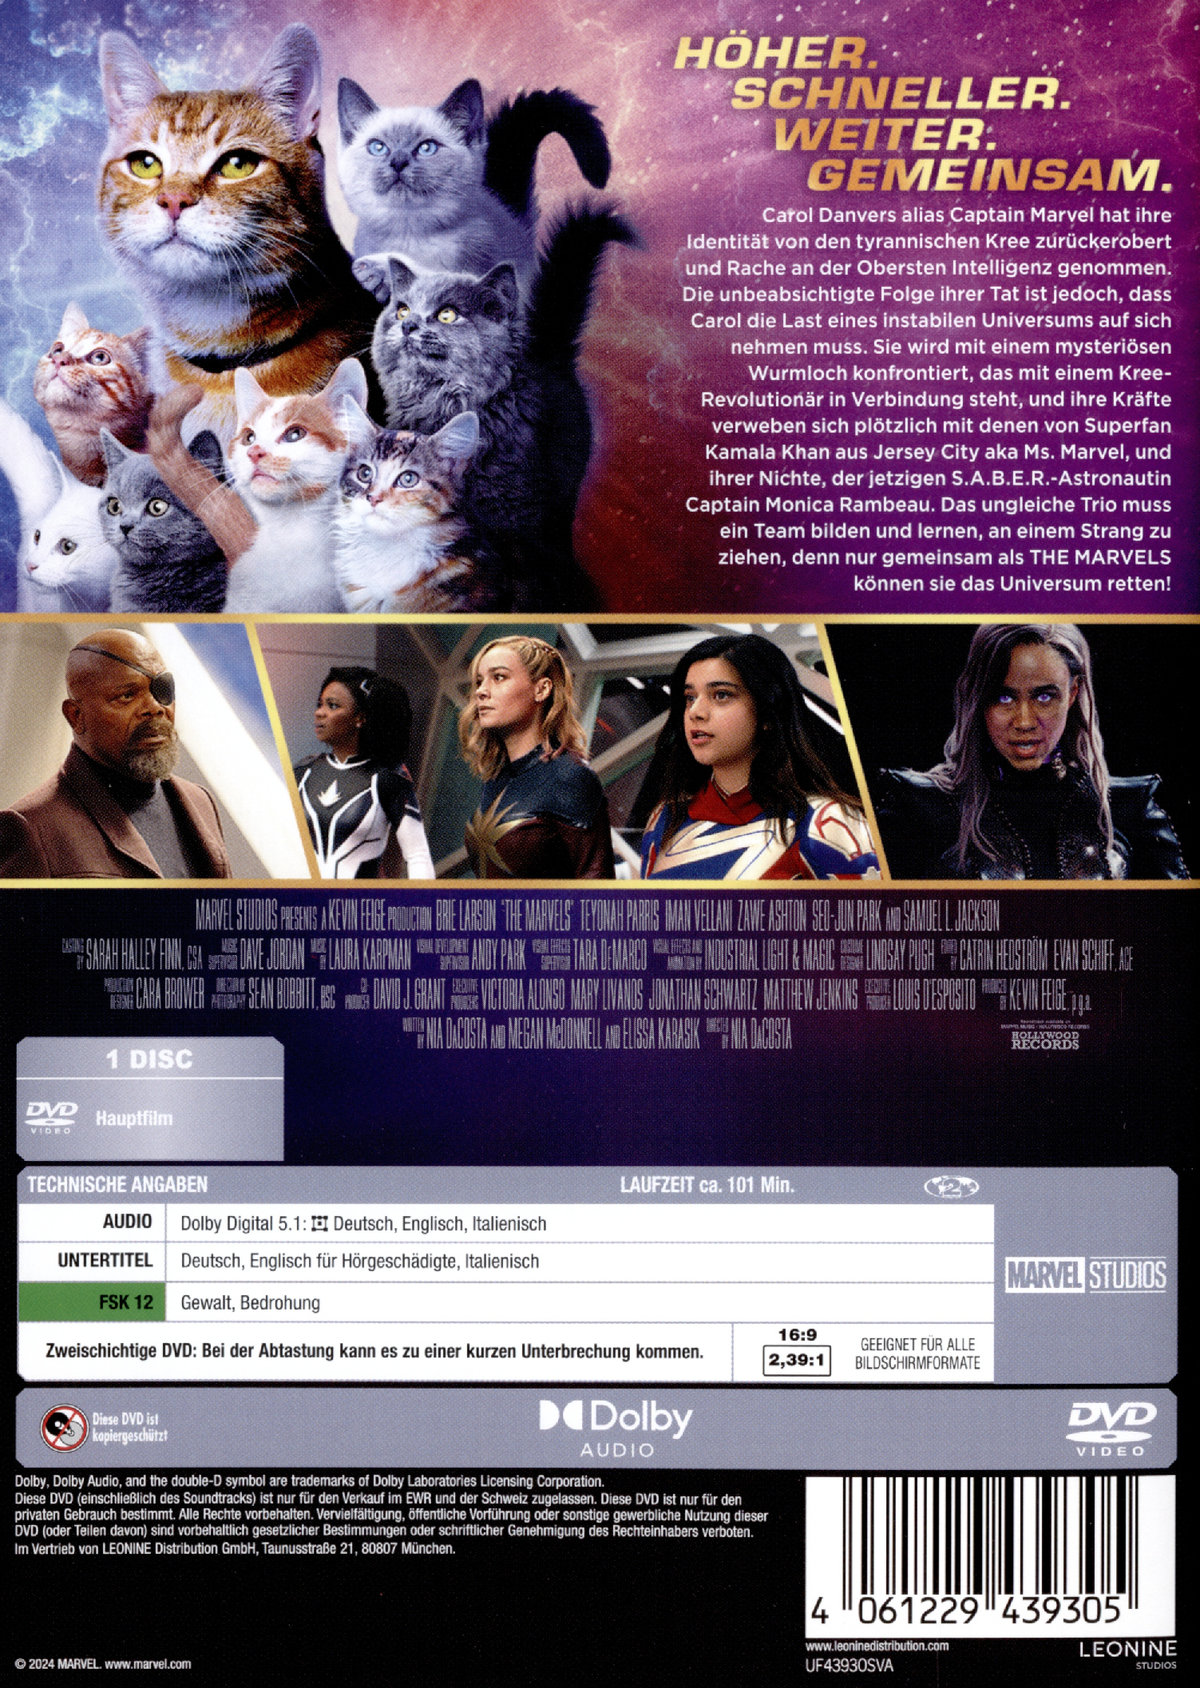 The Marvels  (DVD)